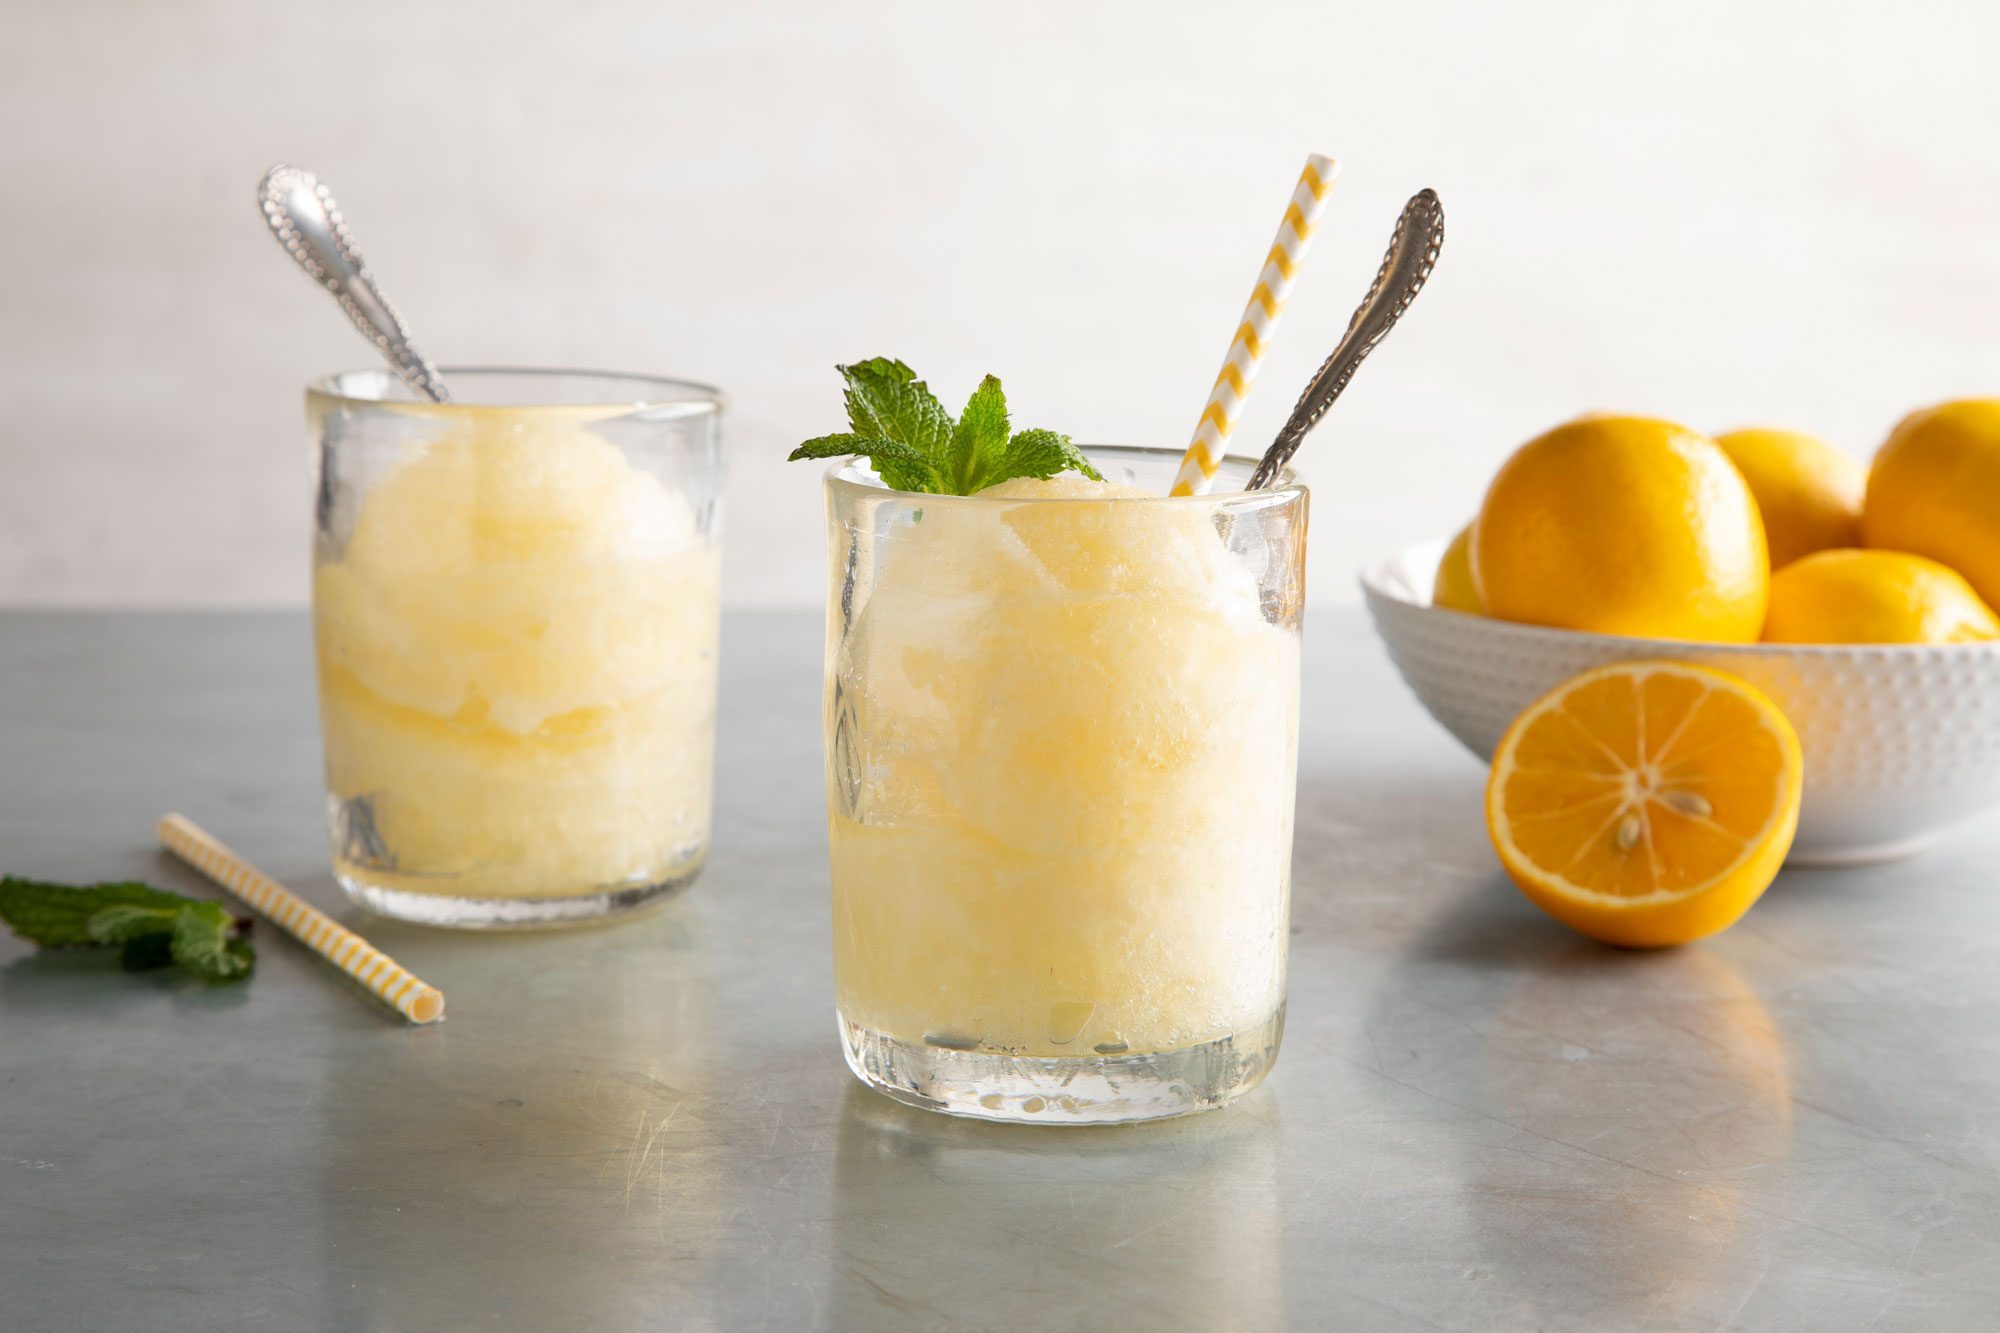 Lemon Ice served in two glasses with mint leaves and oranges